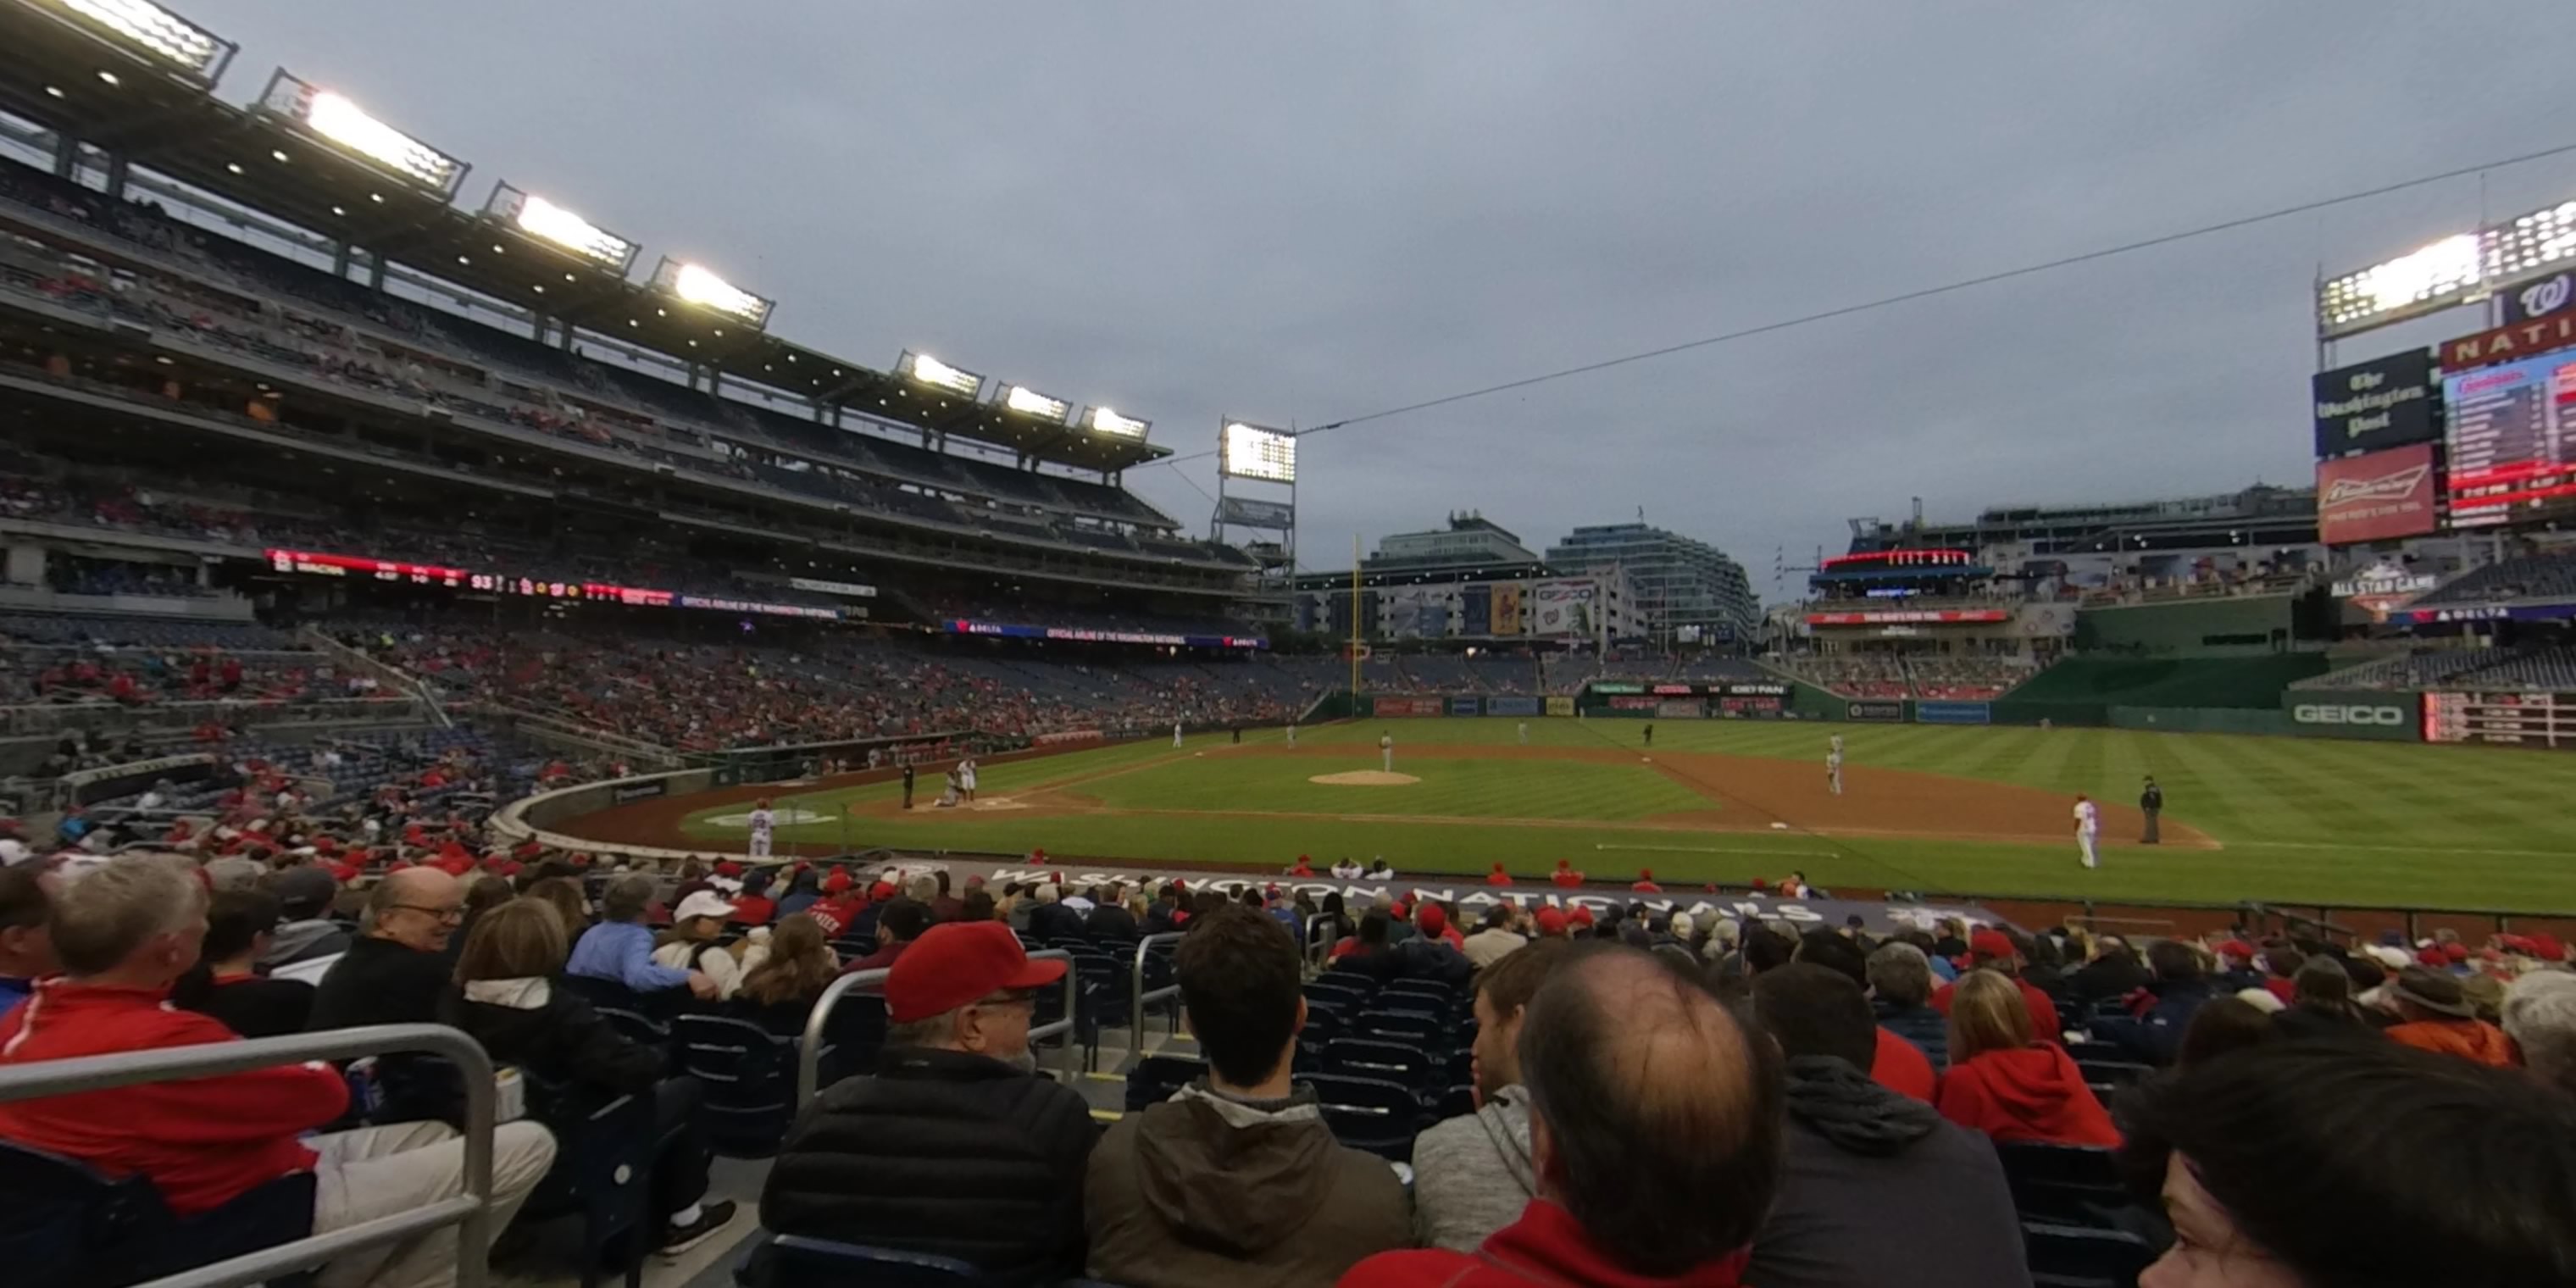 section 128 panoramic seat view  for baseball - nationals park